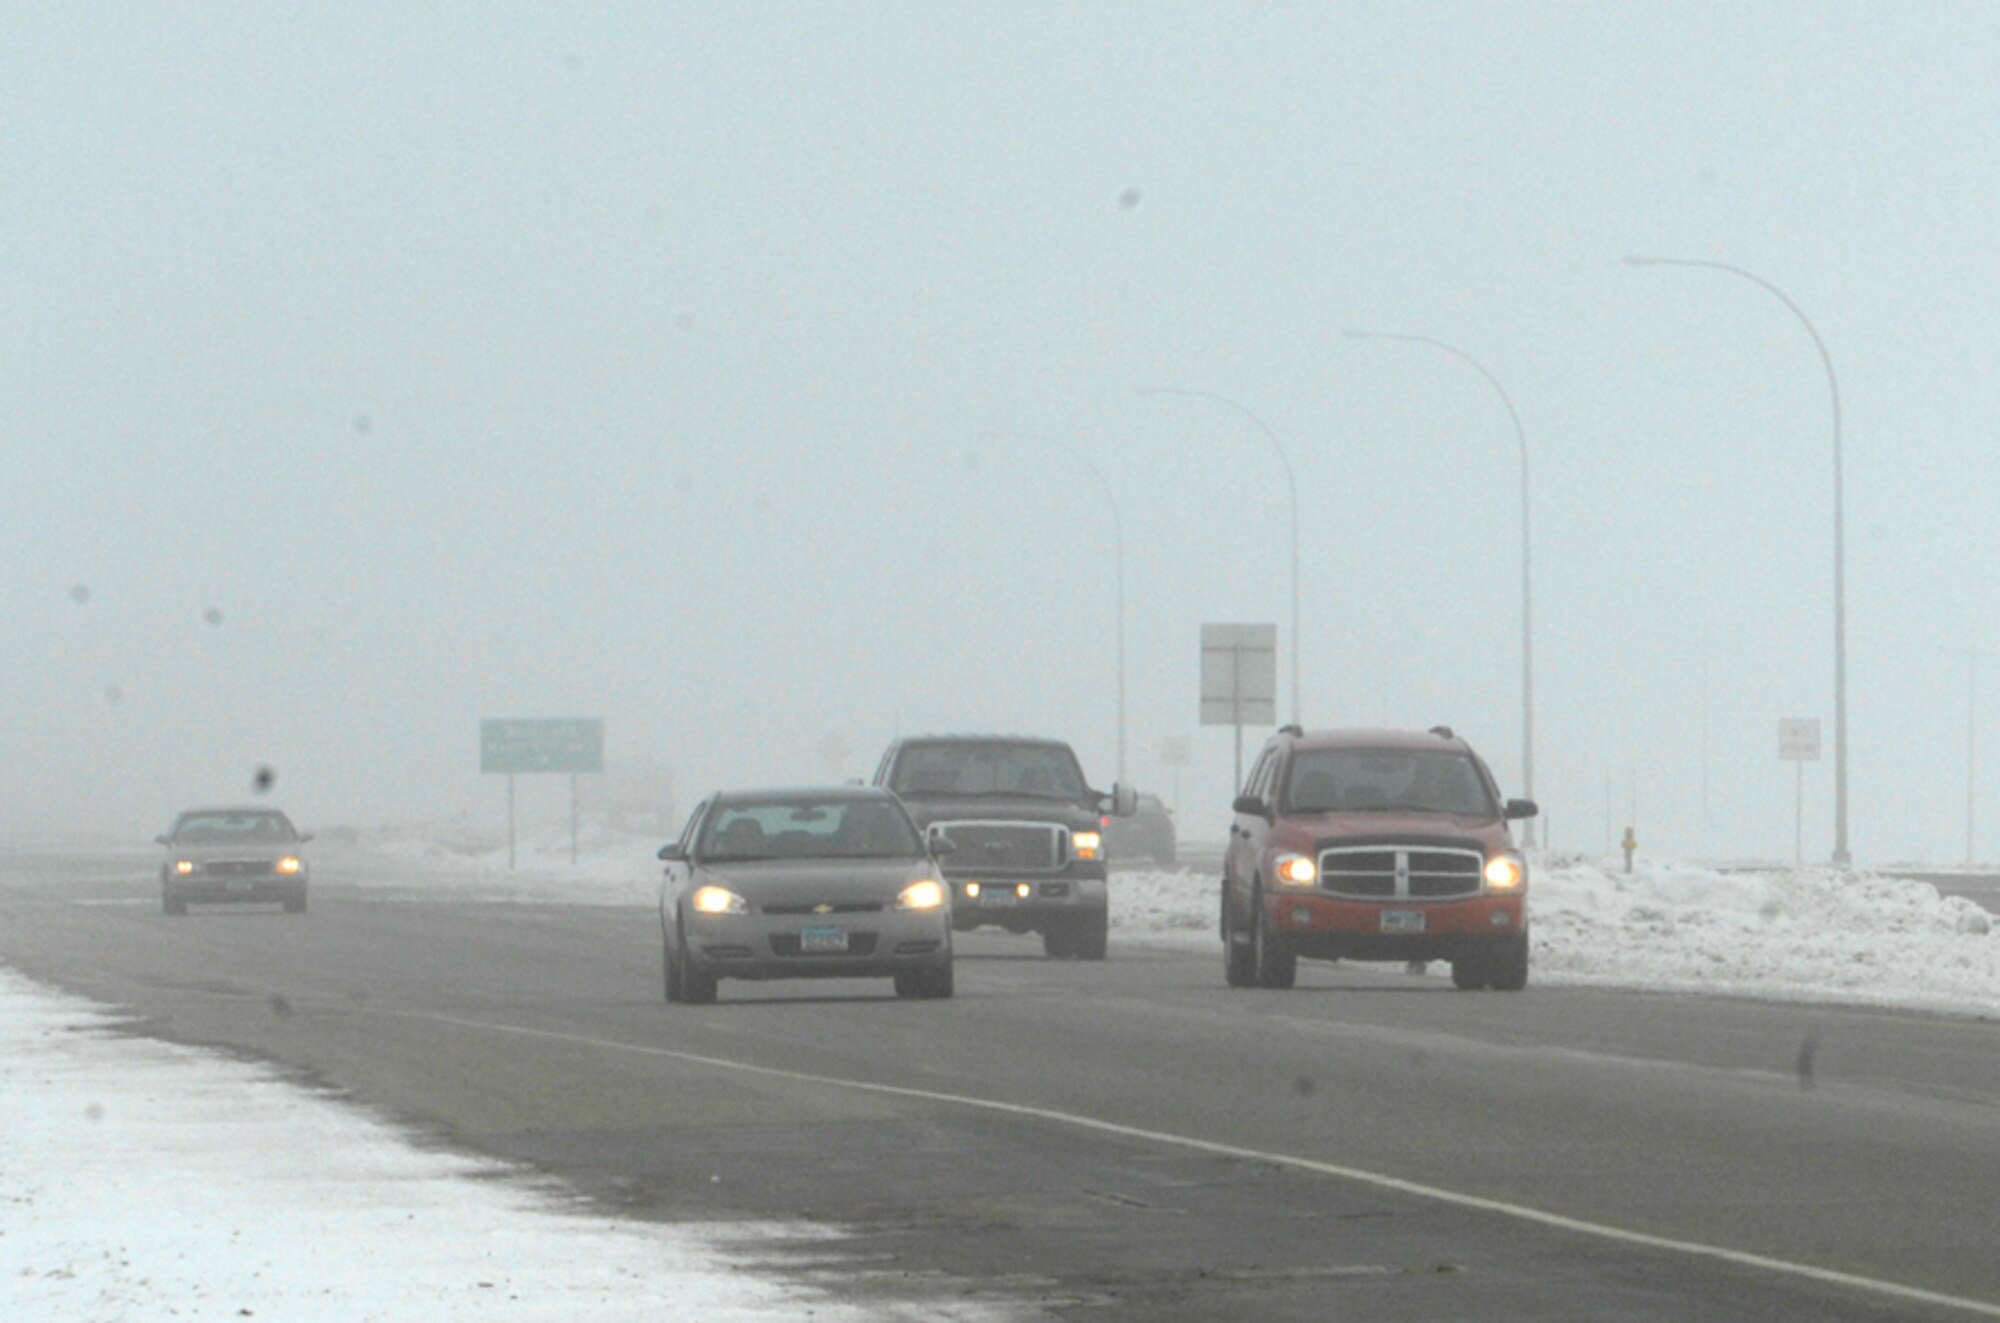 MINOT AIR FORCE BASE, N.D. -- Drivers travel through the fog on highway 83 Feb. 22. Thick fog is one of the many winter hazards all drivers should be aware and take caution. (U.S. Air Force photo by Airman 1st Class Ashley N. Avecilla)